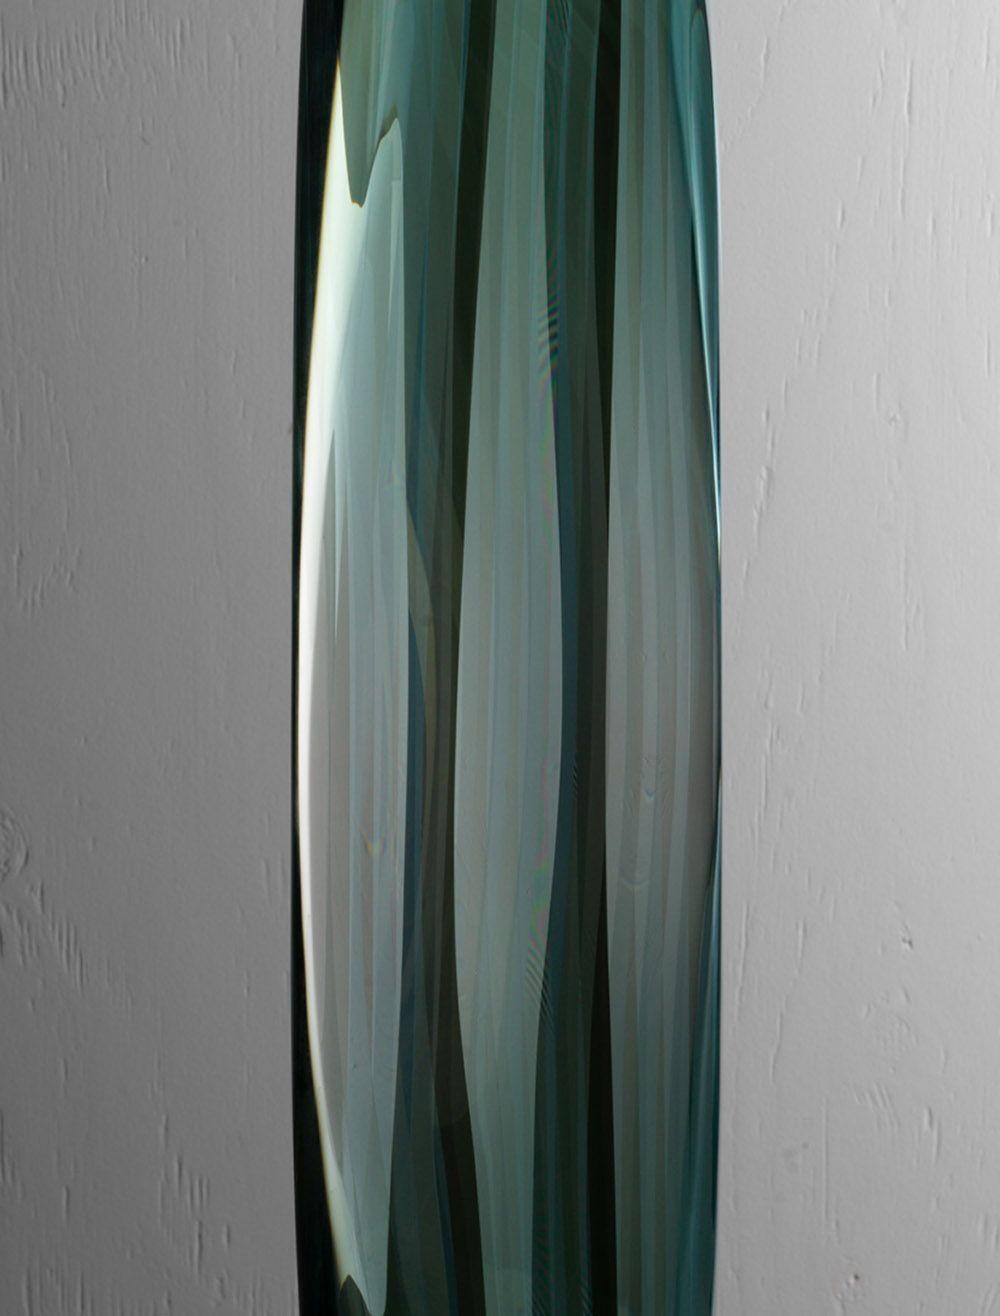 M.160201 by Toshio Iezumi - Glass, Vertical abstract sculpture For Sale 3